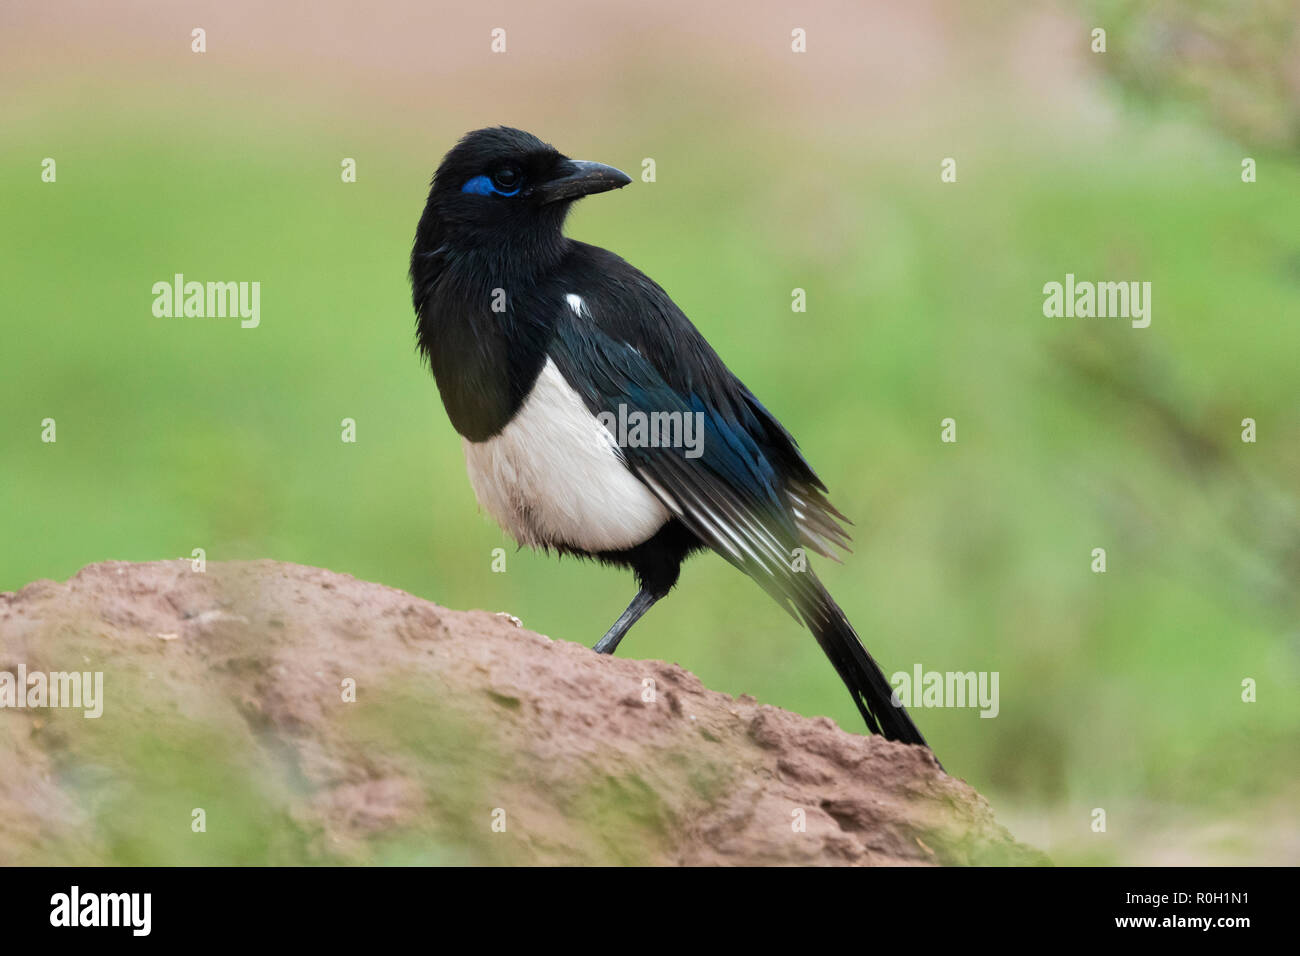 Maghreb Magpie (Pica pica mauritanica), adult standing on the ground in Morocco Stock Photo